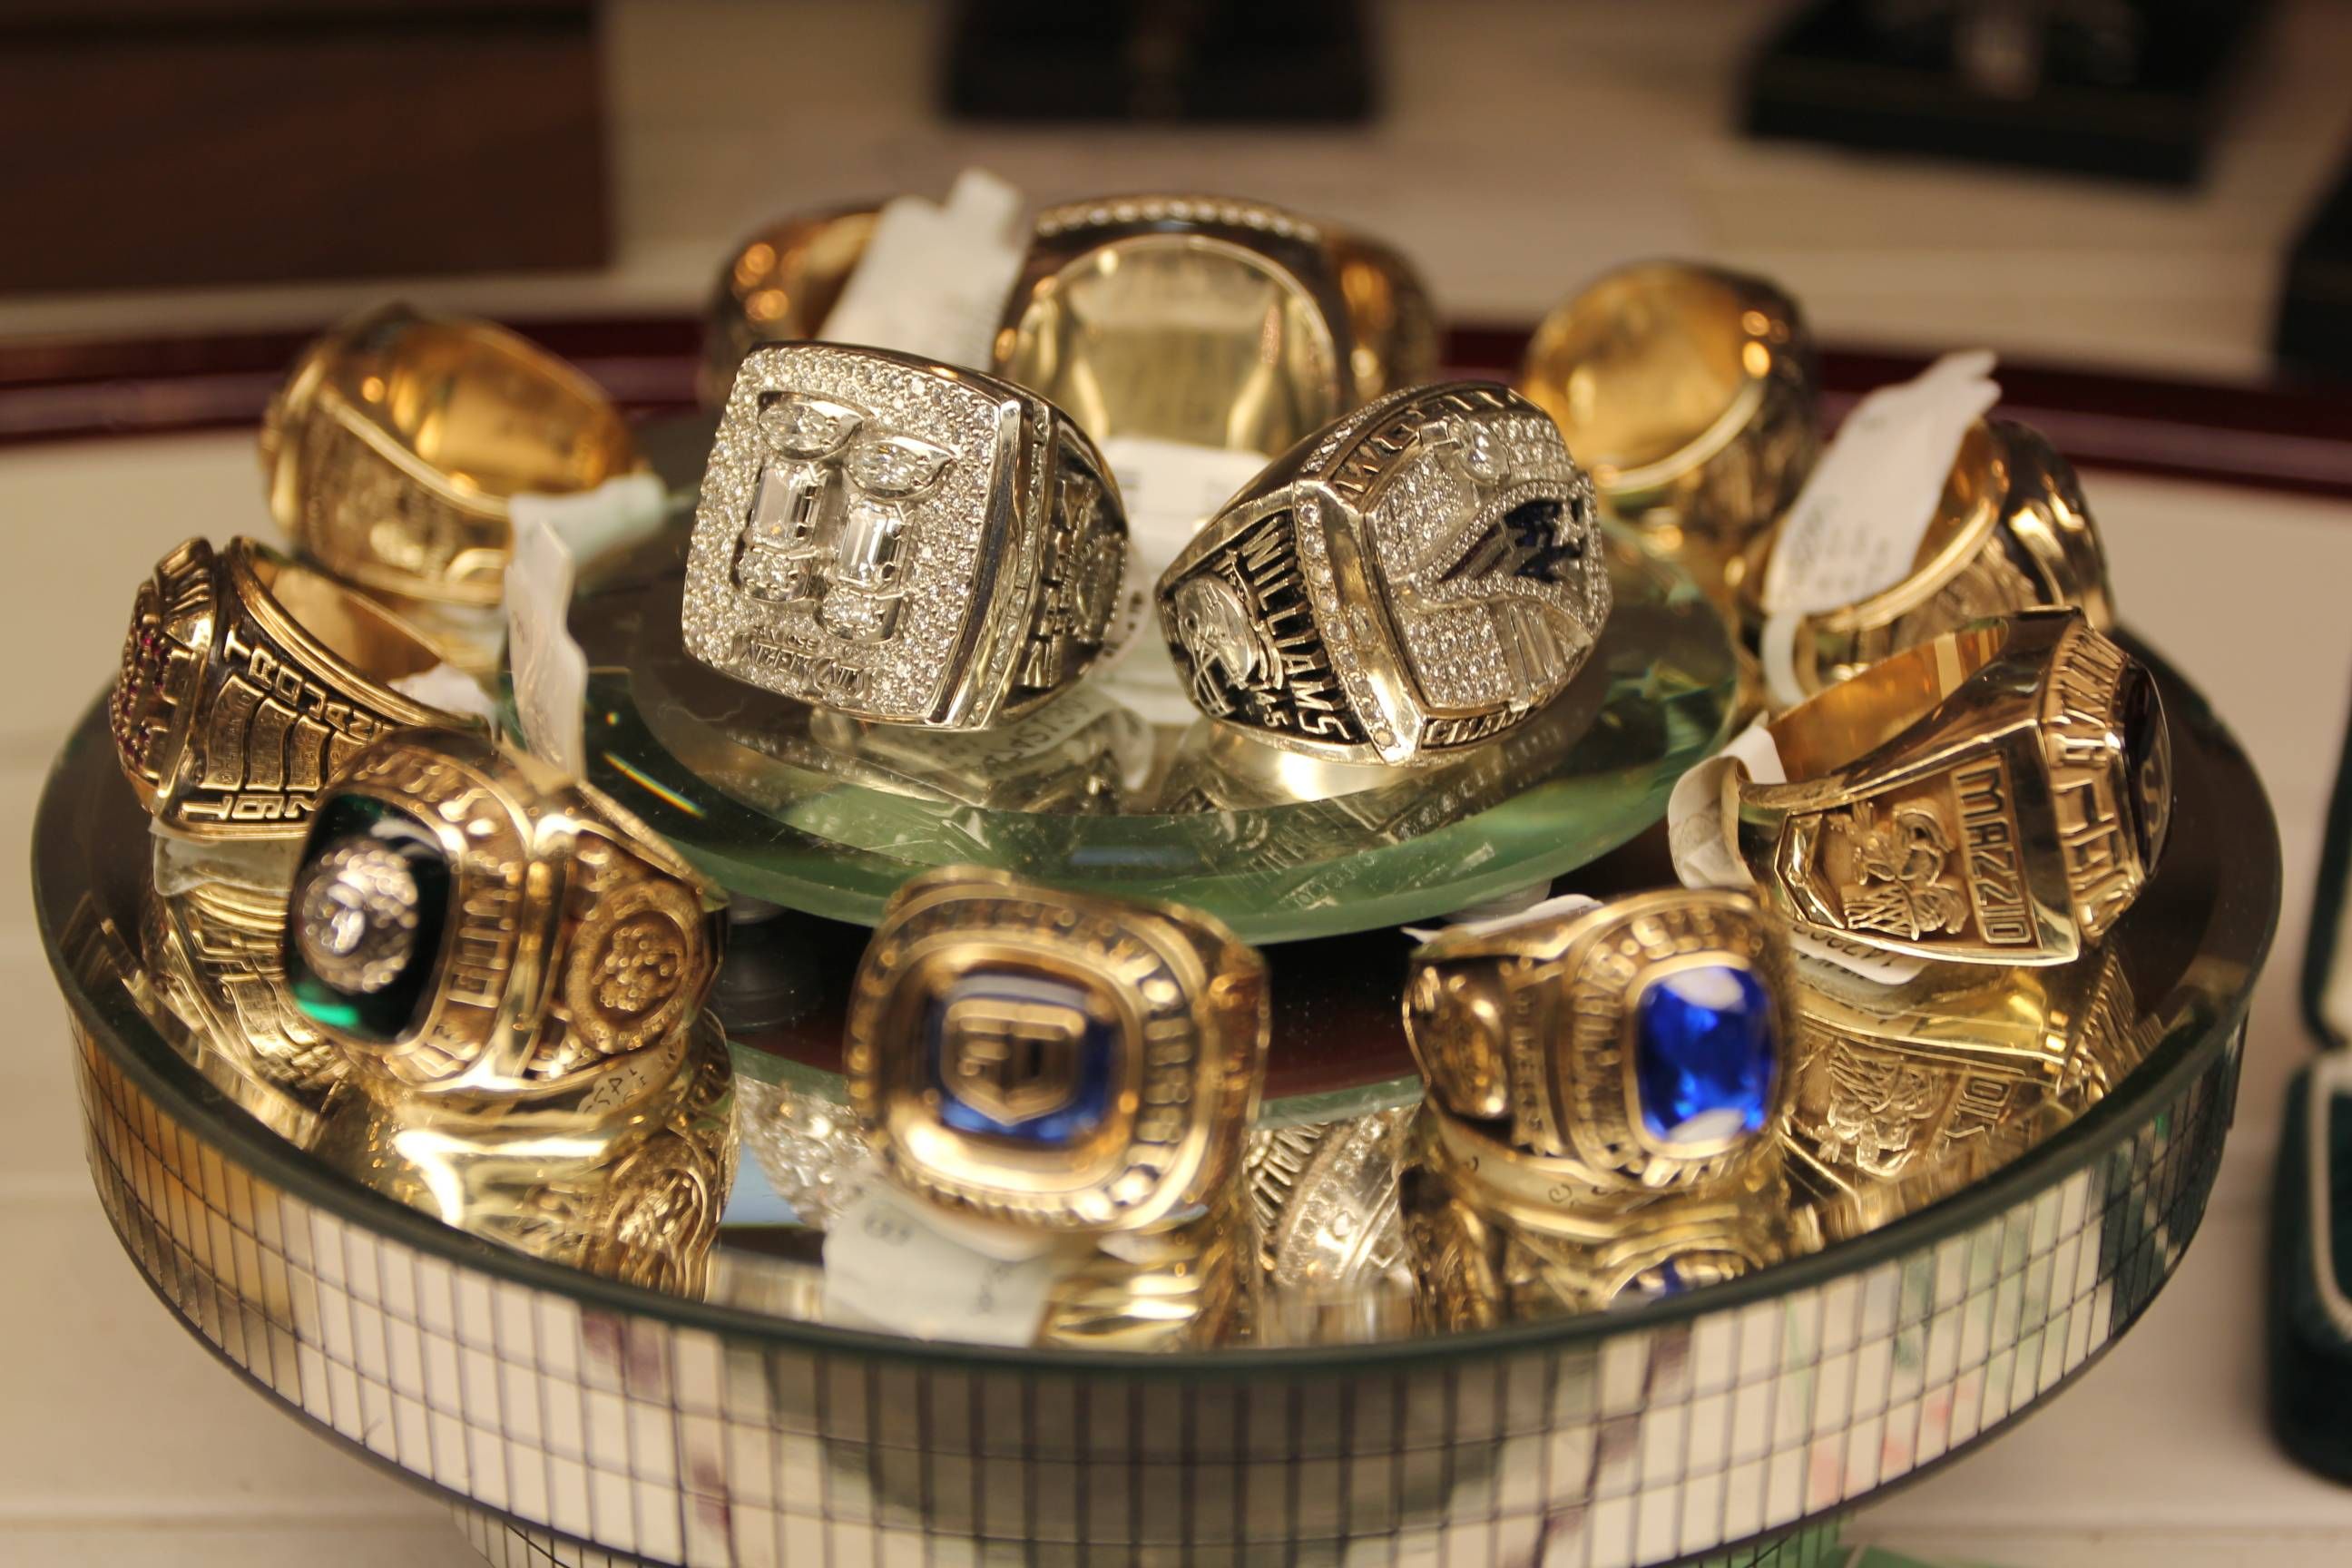 Championship rings on display in Pawn Stars.